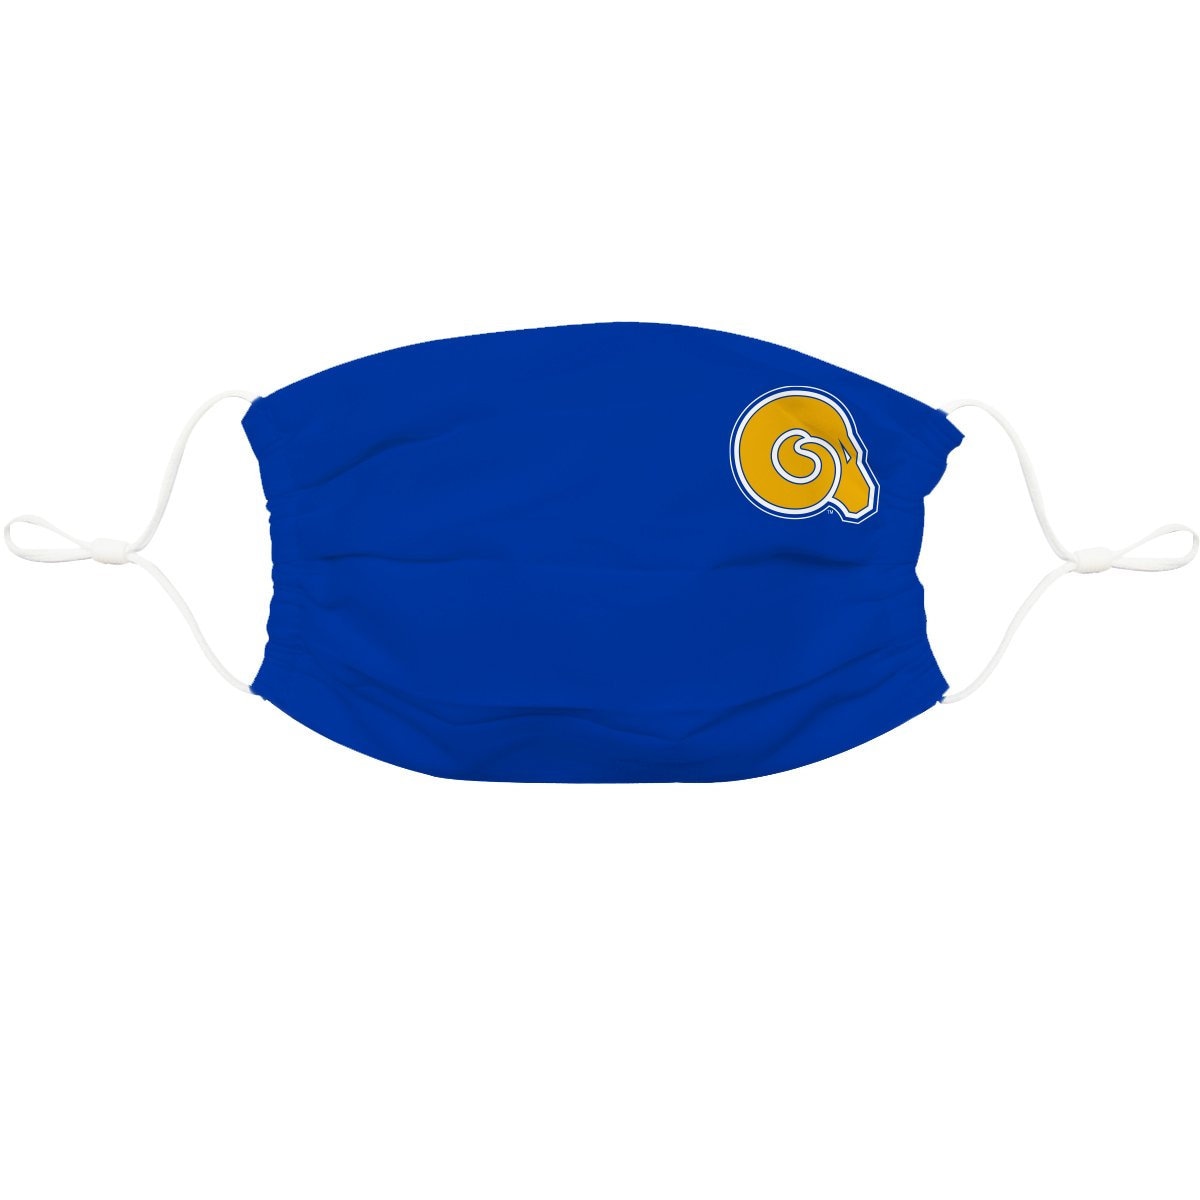 Albany State Rams Face Mask Solid Blue